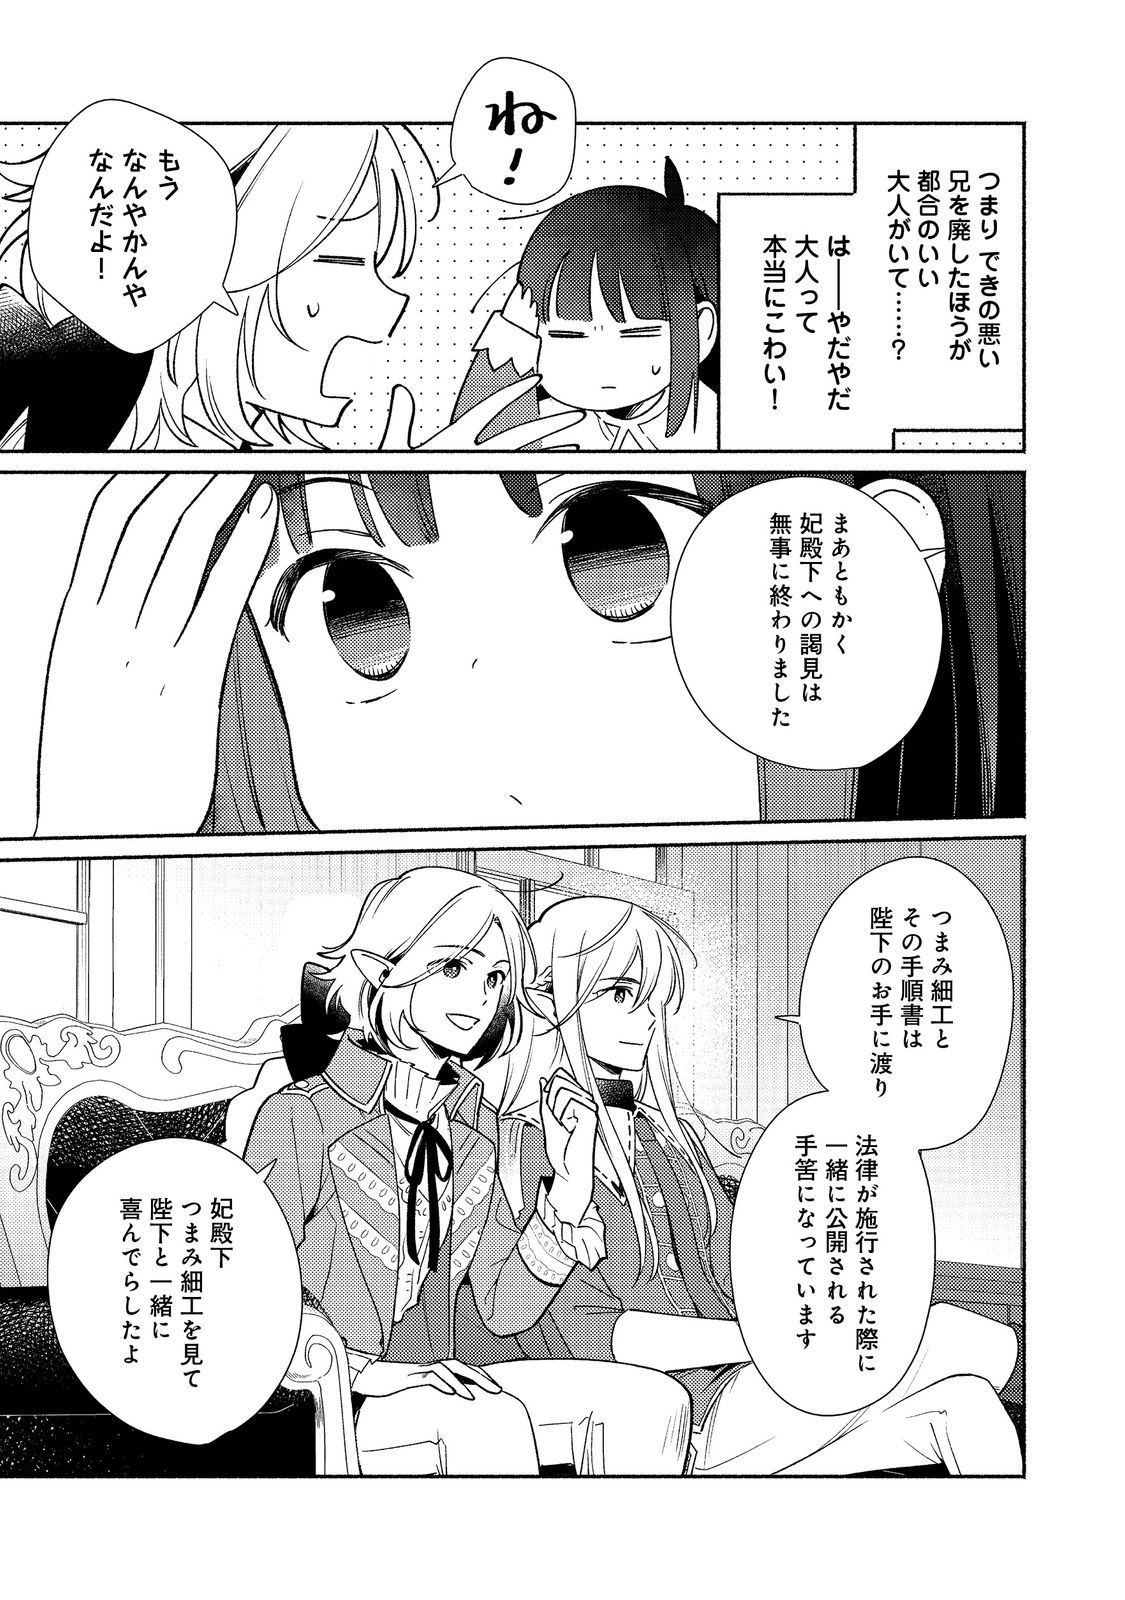 I’m the White Pig Nobleman 第23.1話 - Page 7